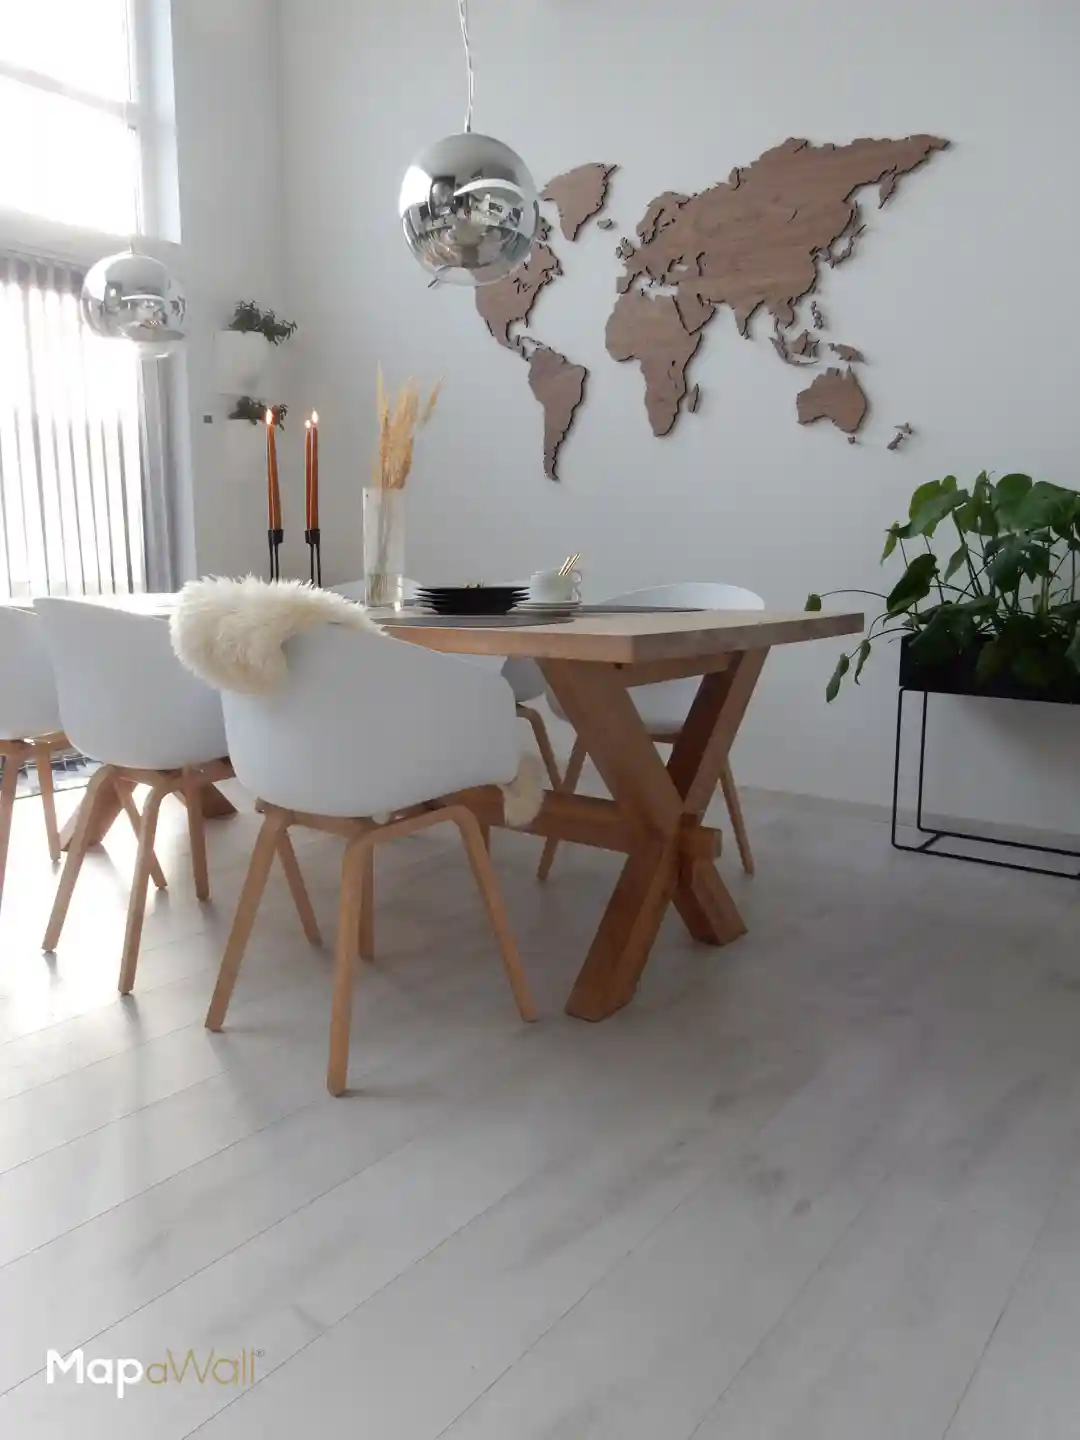 Magnetic MapaWall American Walnut world map with country border, untreated and installed in a modern Scandinavian interior in Norway.